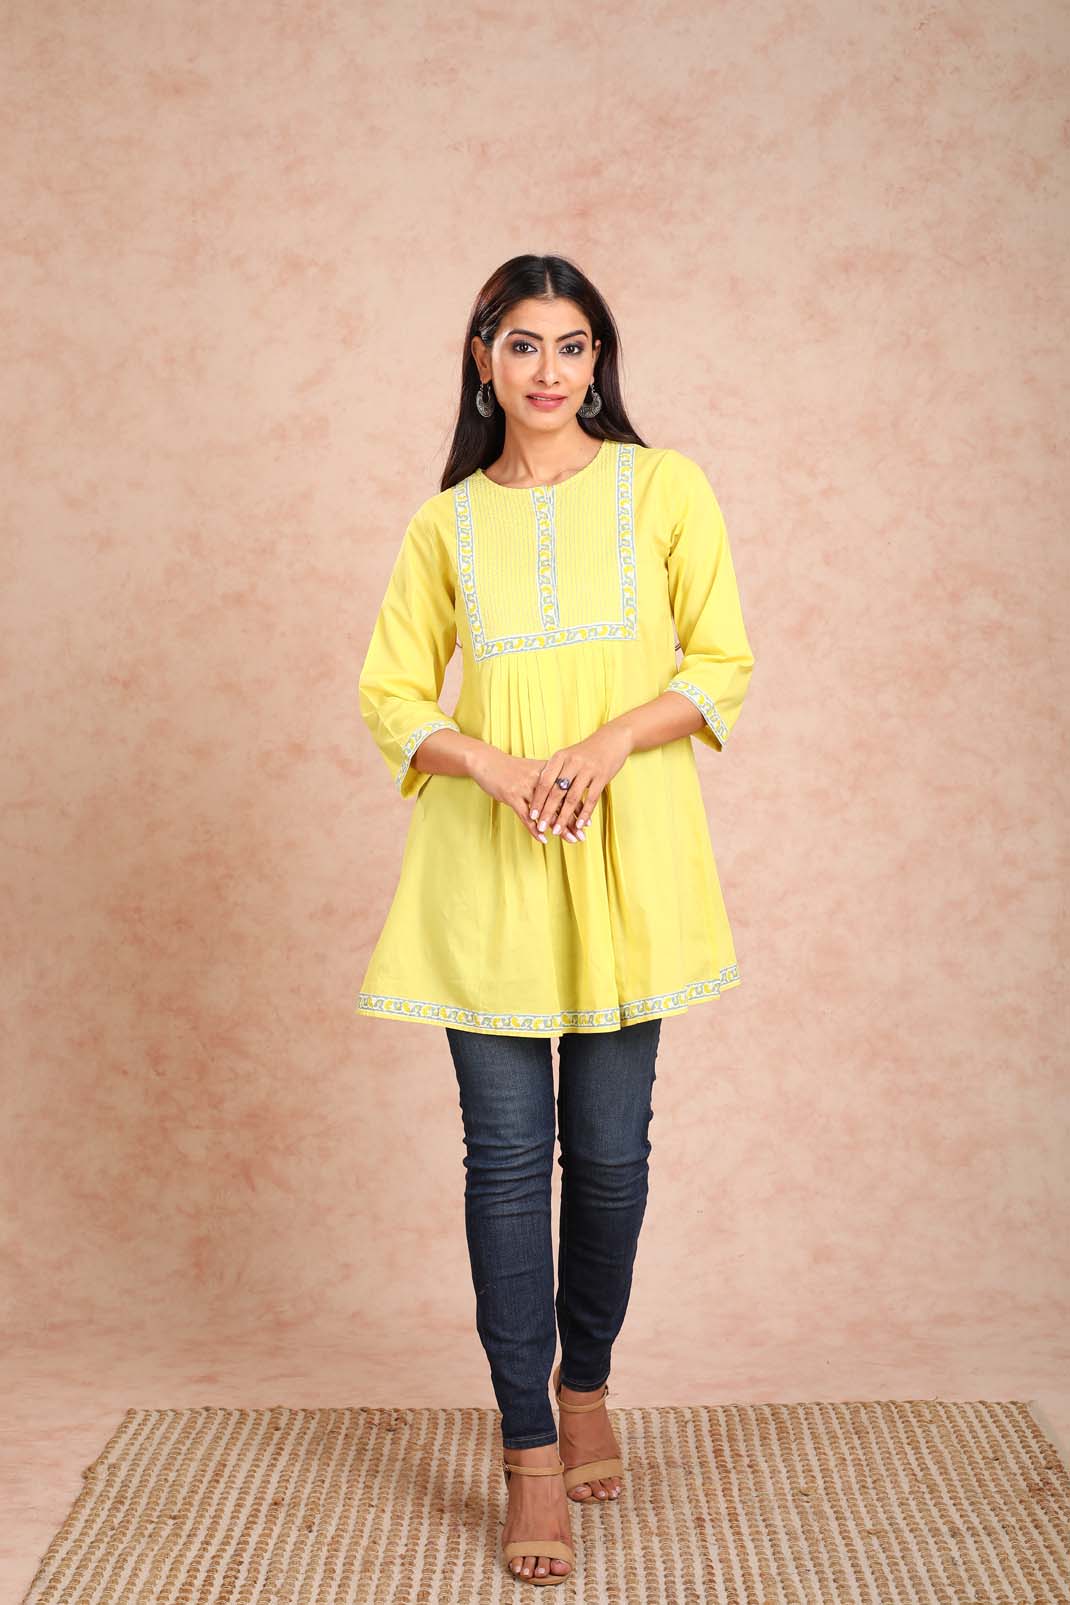 Cellery Tunic (Lime Yellow)